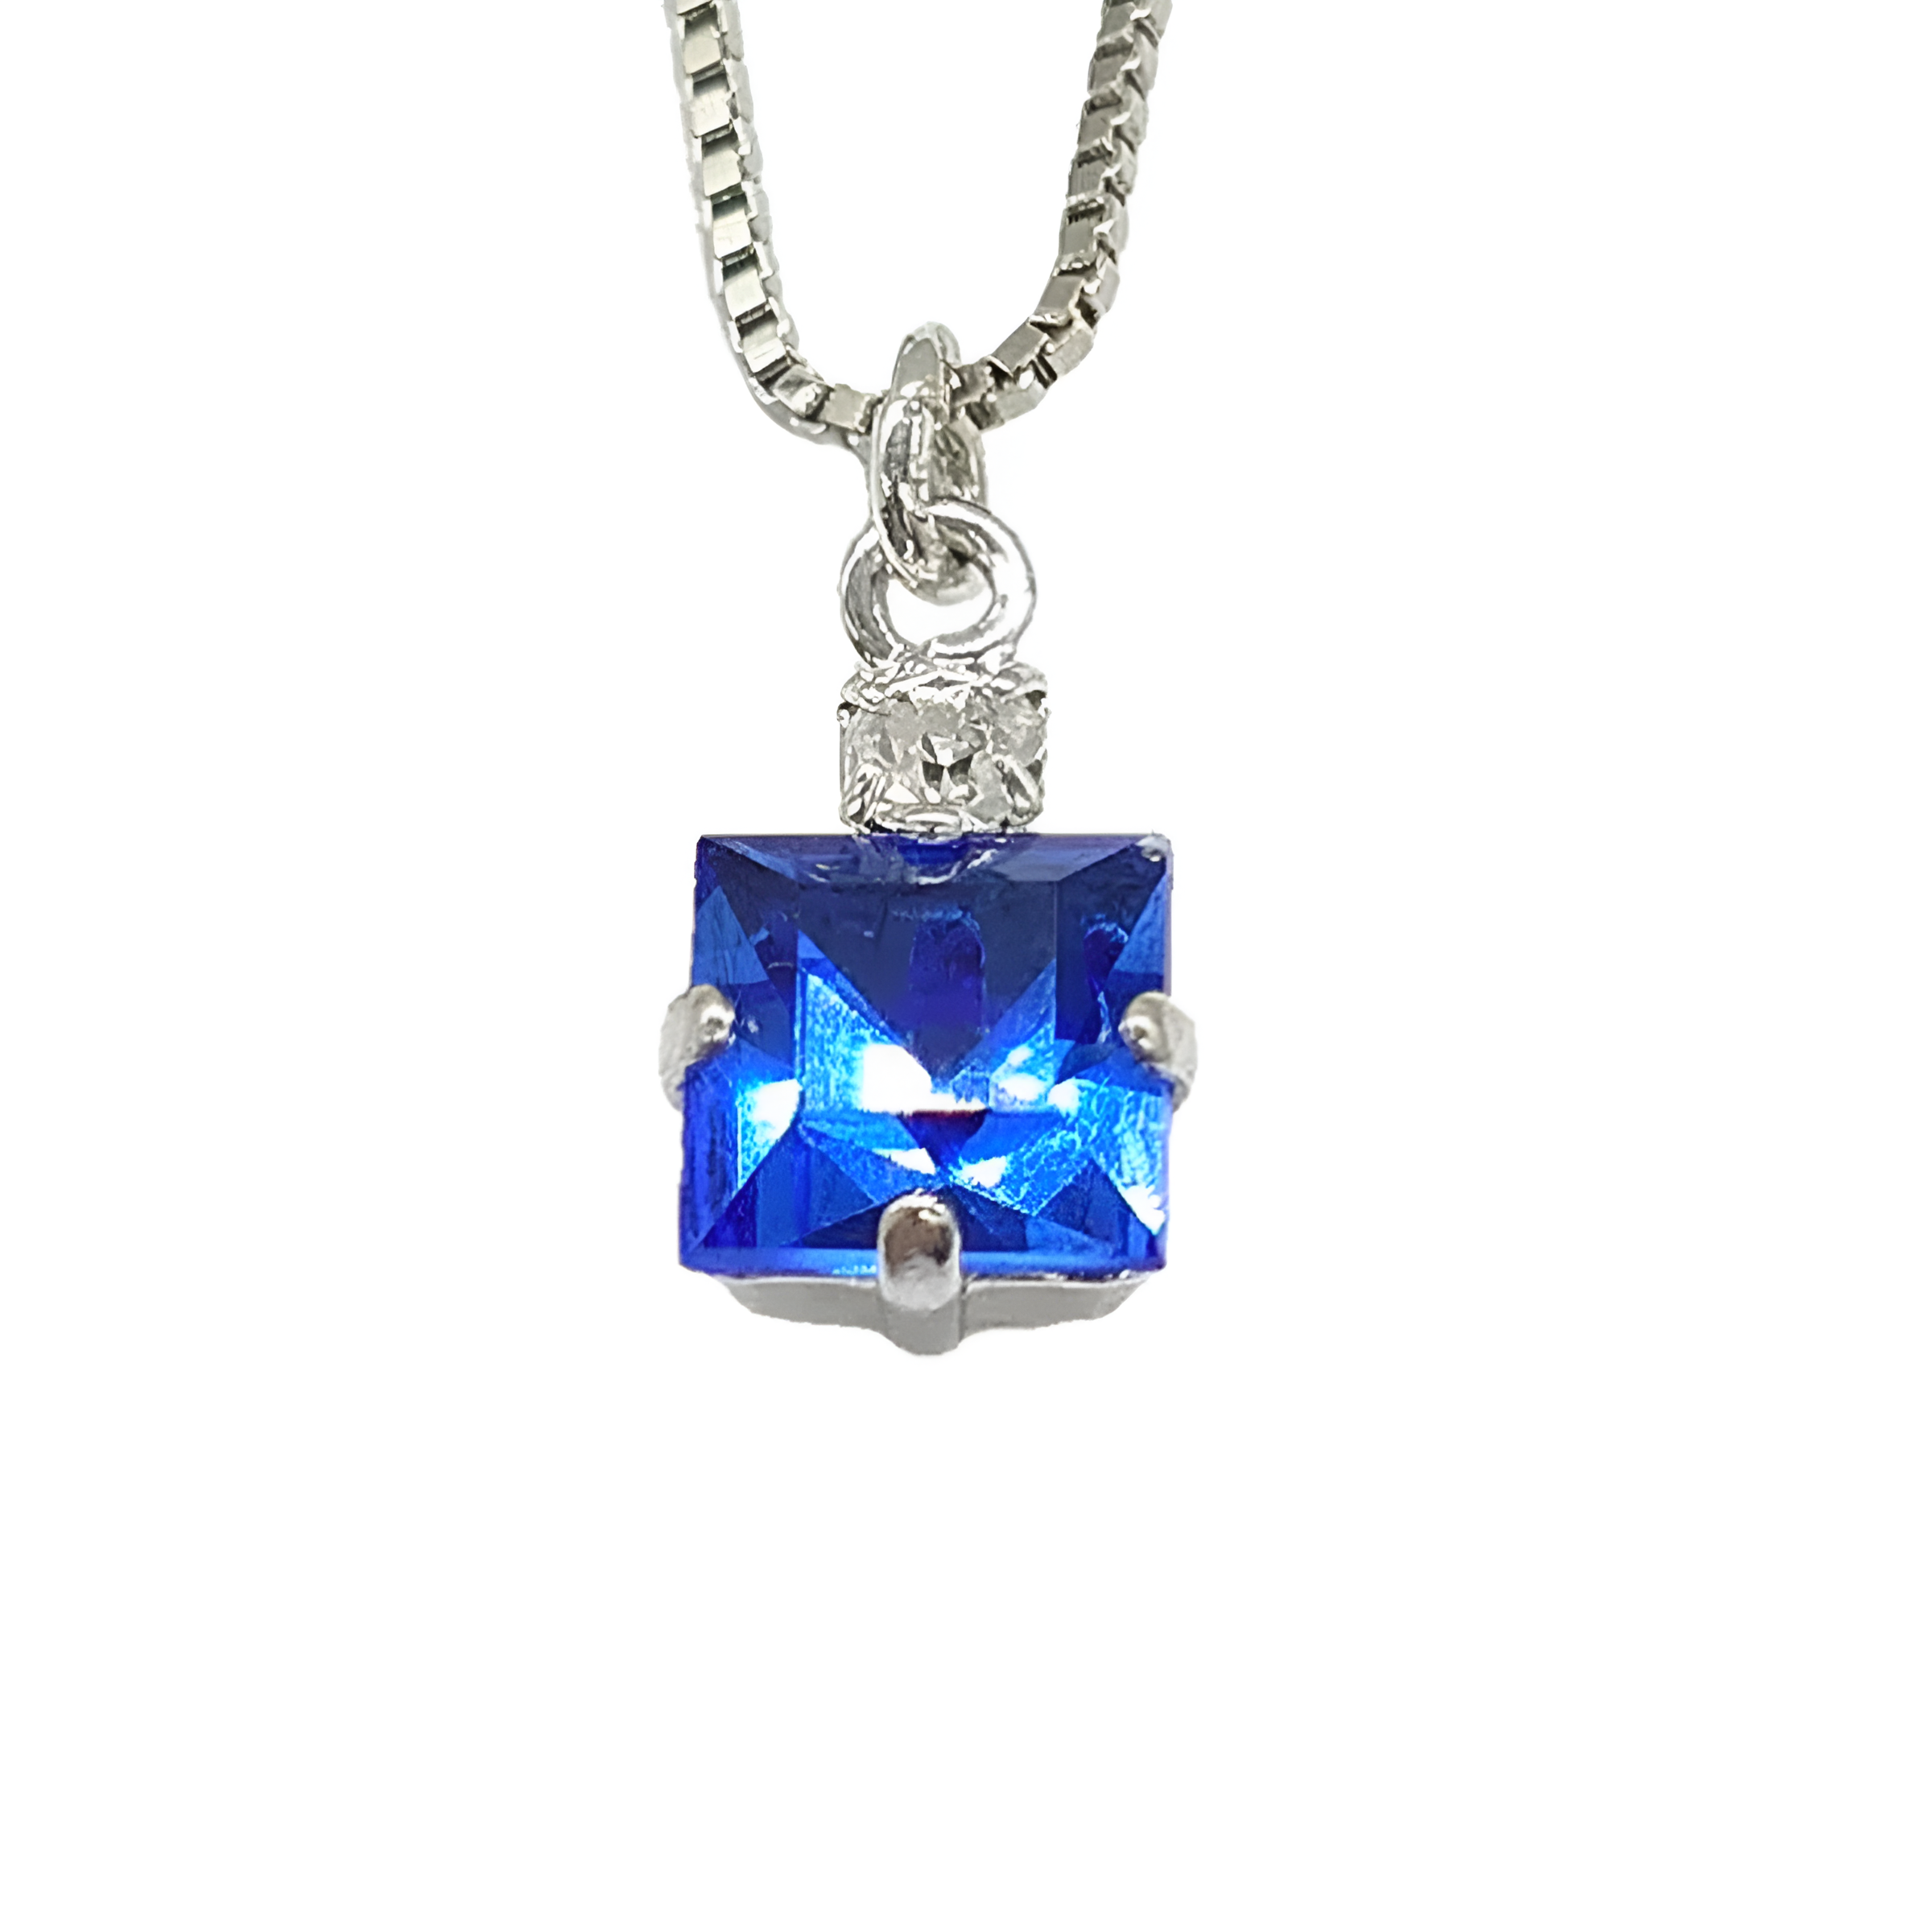 Small Swarovski Crystals Square Pendant With Silver Fittings